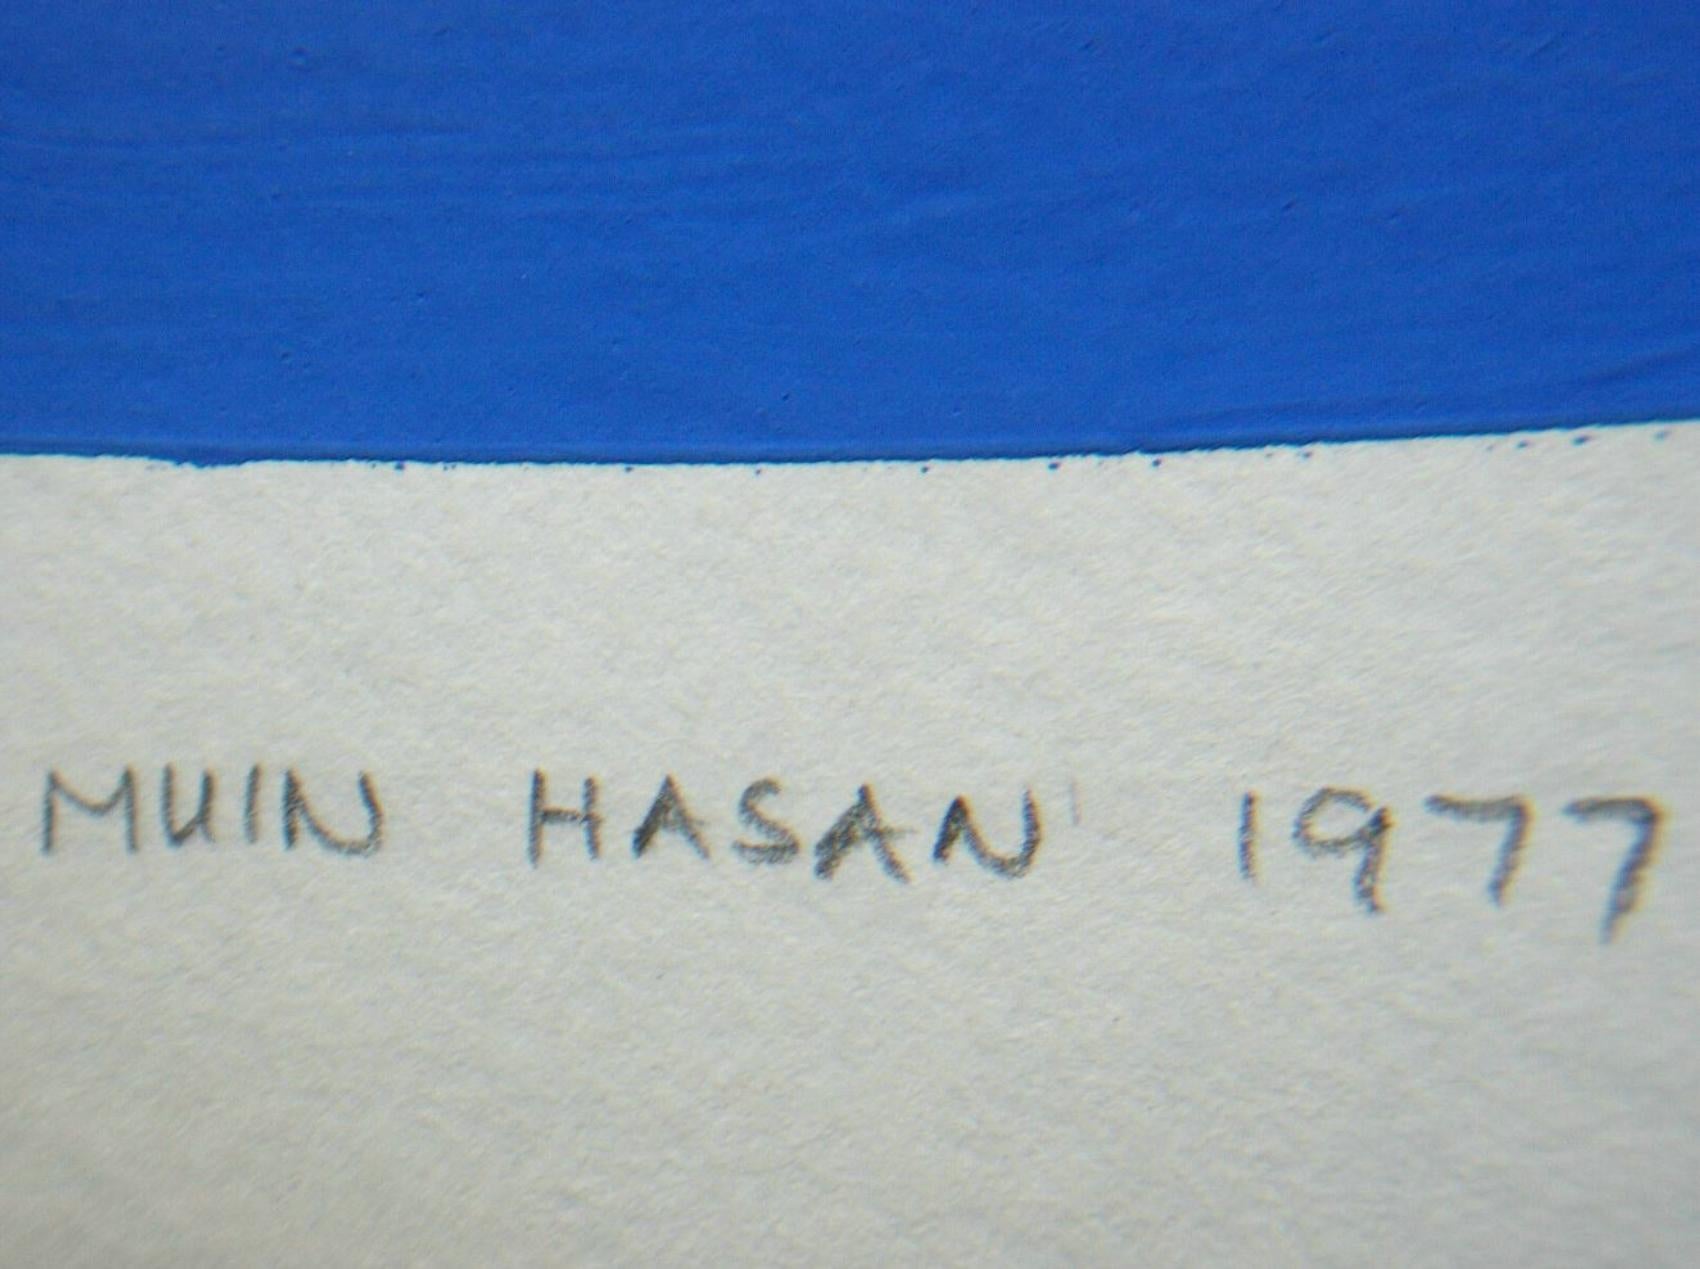 Muin Hasan,  'Allah', Mid-Century Gouache Painting on Paper, Unframed, C.1977 For Sale 2